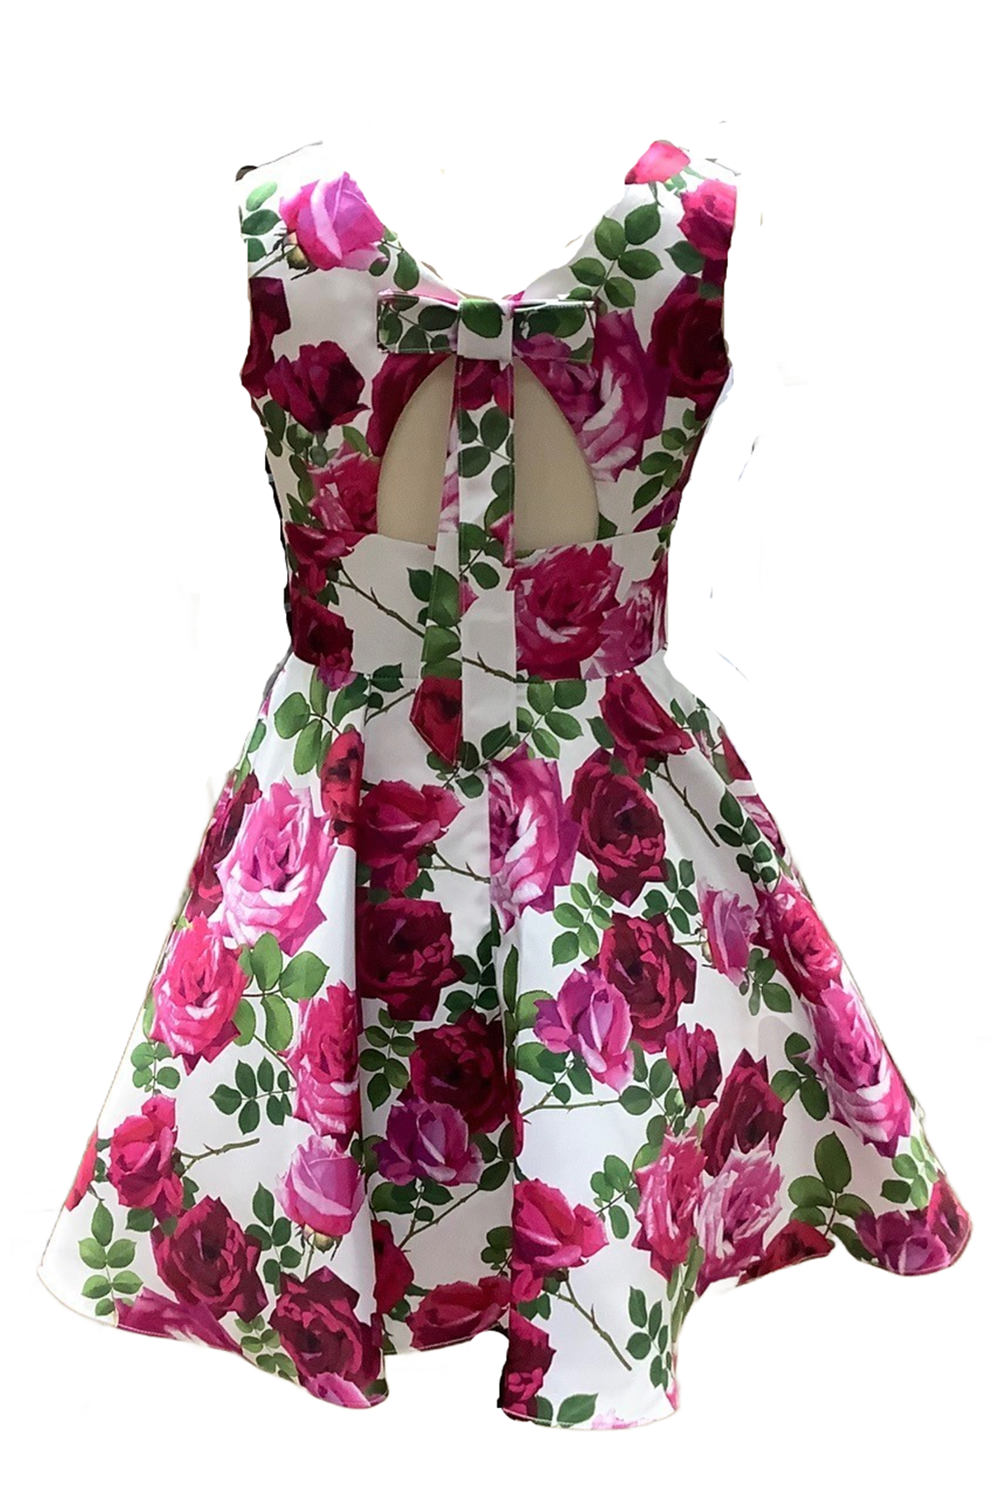 Ivory and Fuchsia Floral Dress